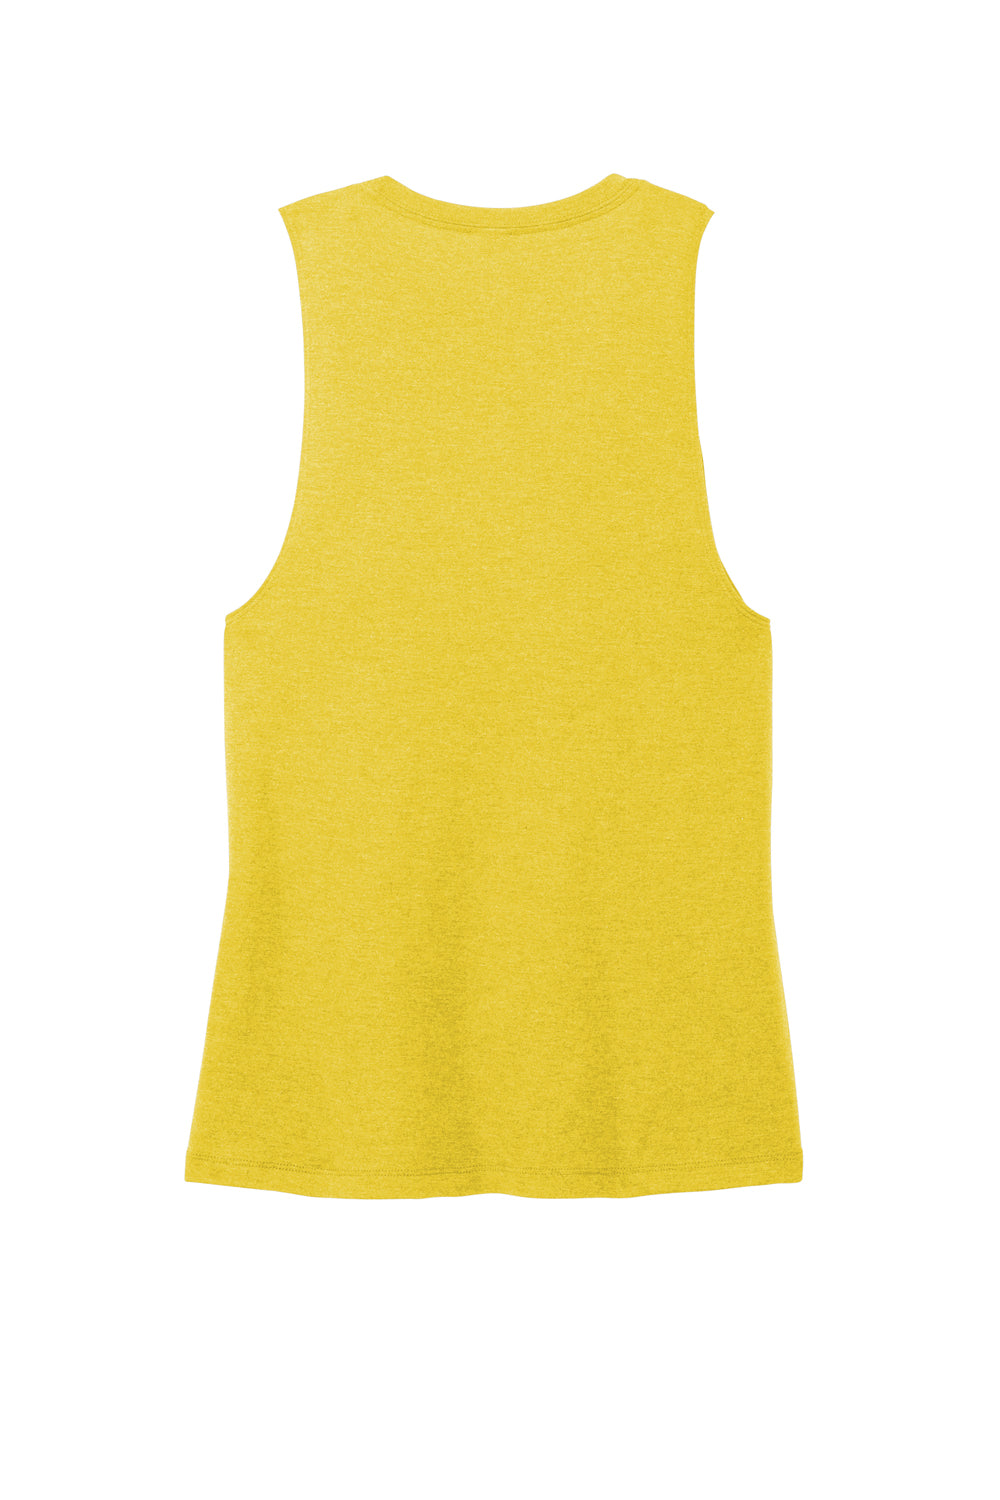 District DT153 Womens Perfect Tri Muscle Tank Top Heather Ochre Yellow Flat Back